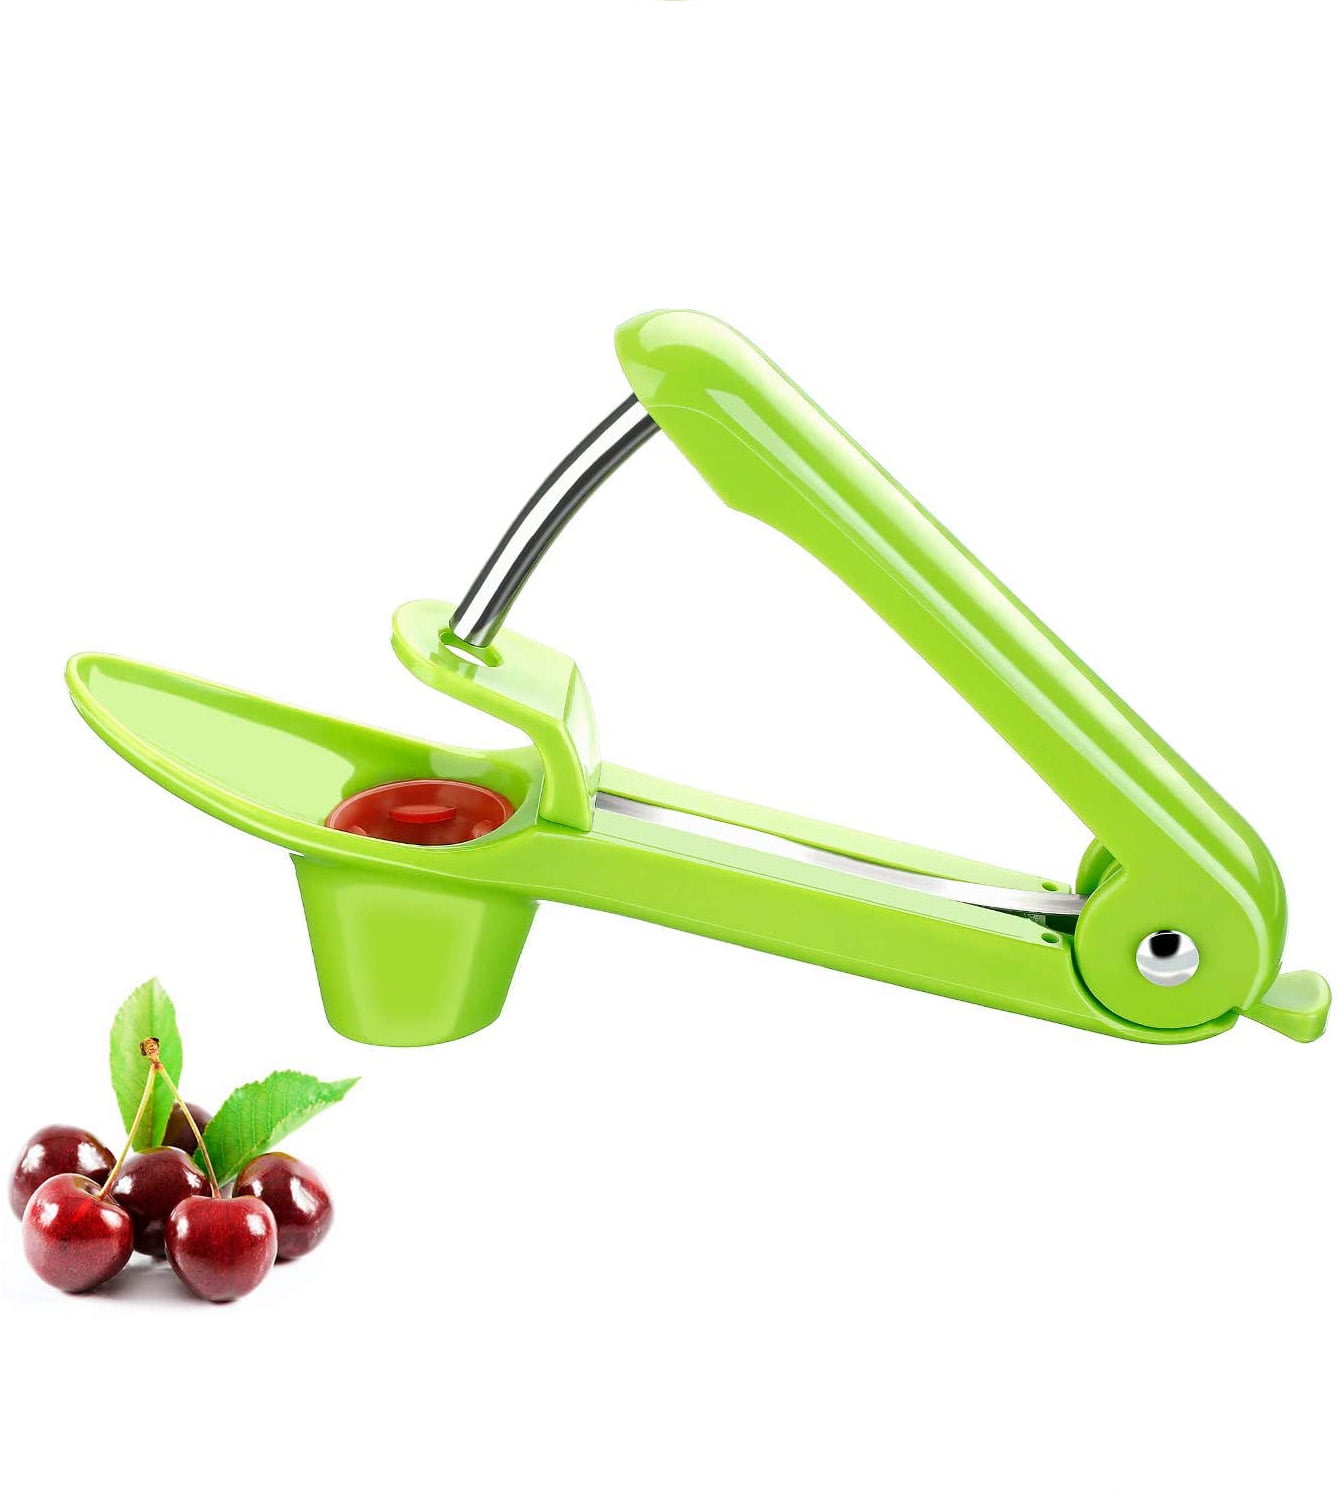 Cherry Olive Pitter Tool Cherry Stoner Pitter Core Remover with Lock in Green 